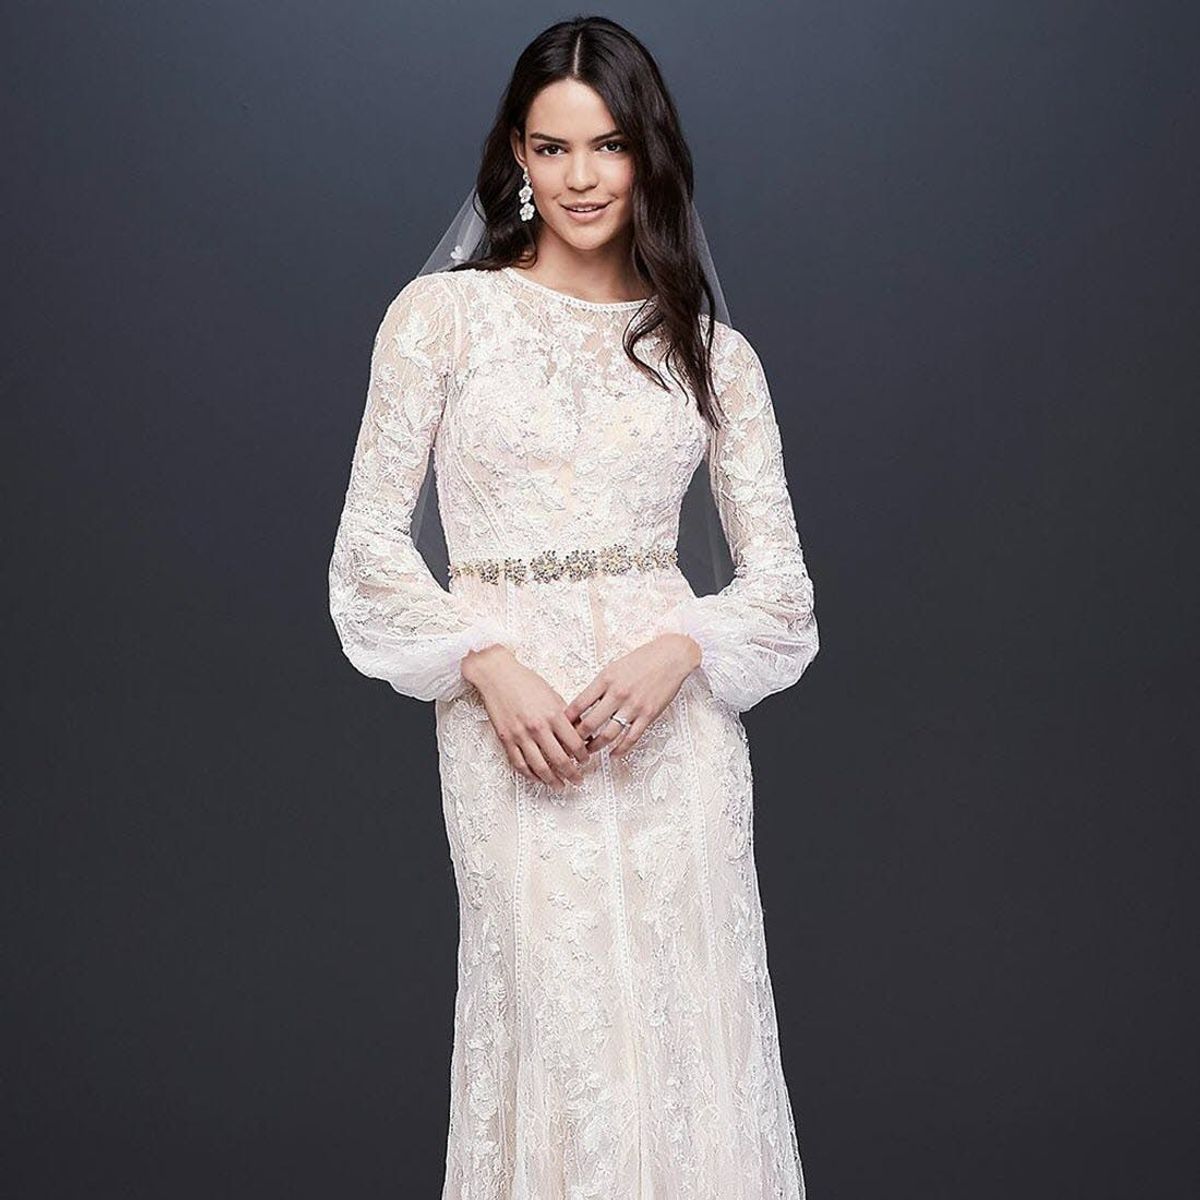 14 Affordable Statement Sleeve Wedding Dresses for the 2019 Bride